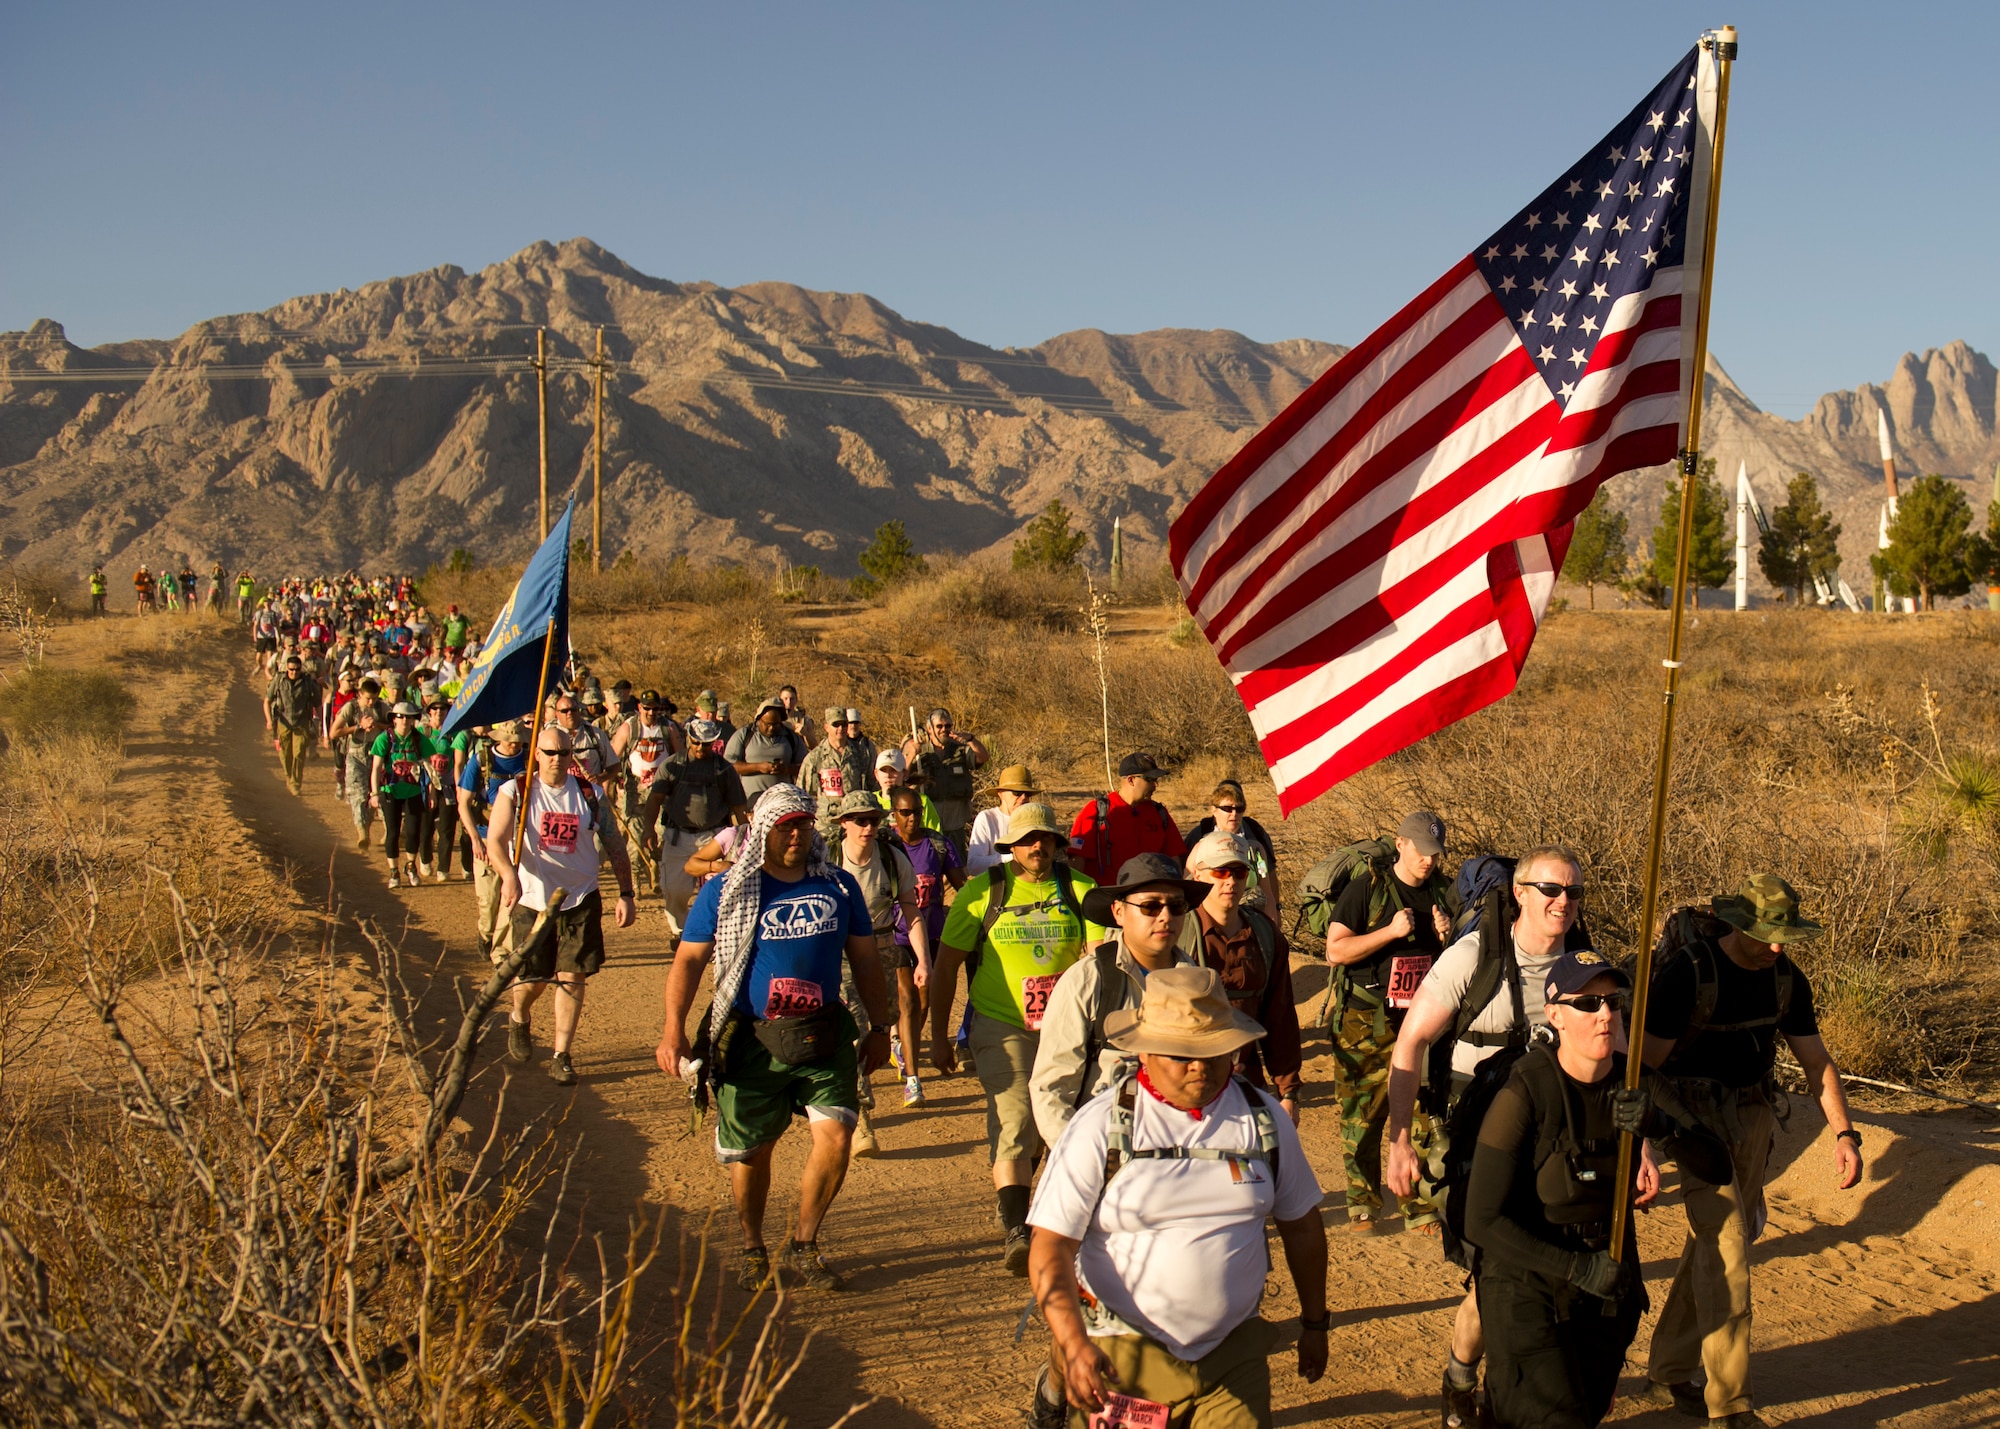 Participants in the Bataan Memorial Death March begin their trek through the sand at White Sands Missile Range, N.M., March 17. The event included both a full 26.2-mile marathon and a 15.2-mile honorary march. More than 5,800 people from across the world participated in the 26.2-mile memorial march to honor the 76,000 prisoners of war who were forced to endure marching nearly 80 miles under brutal conditions during World War II. (U.S. Air Force Photo by Airman 1st Class Michael Shoemaker/Released)